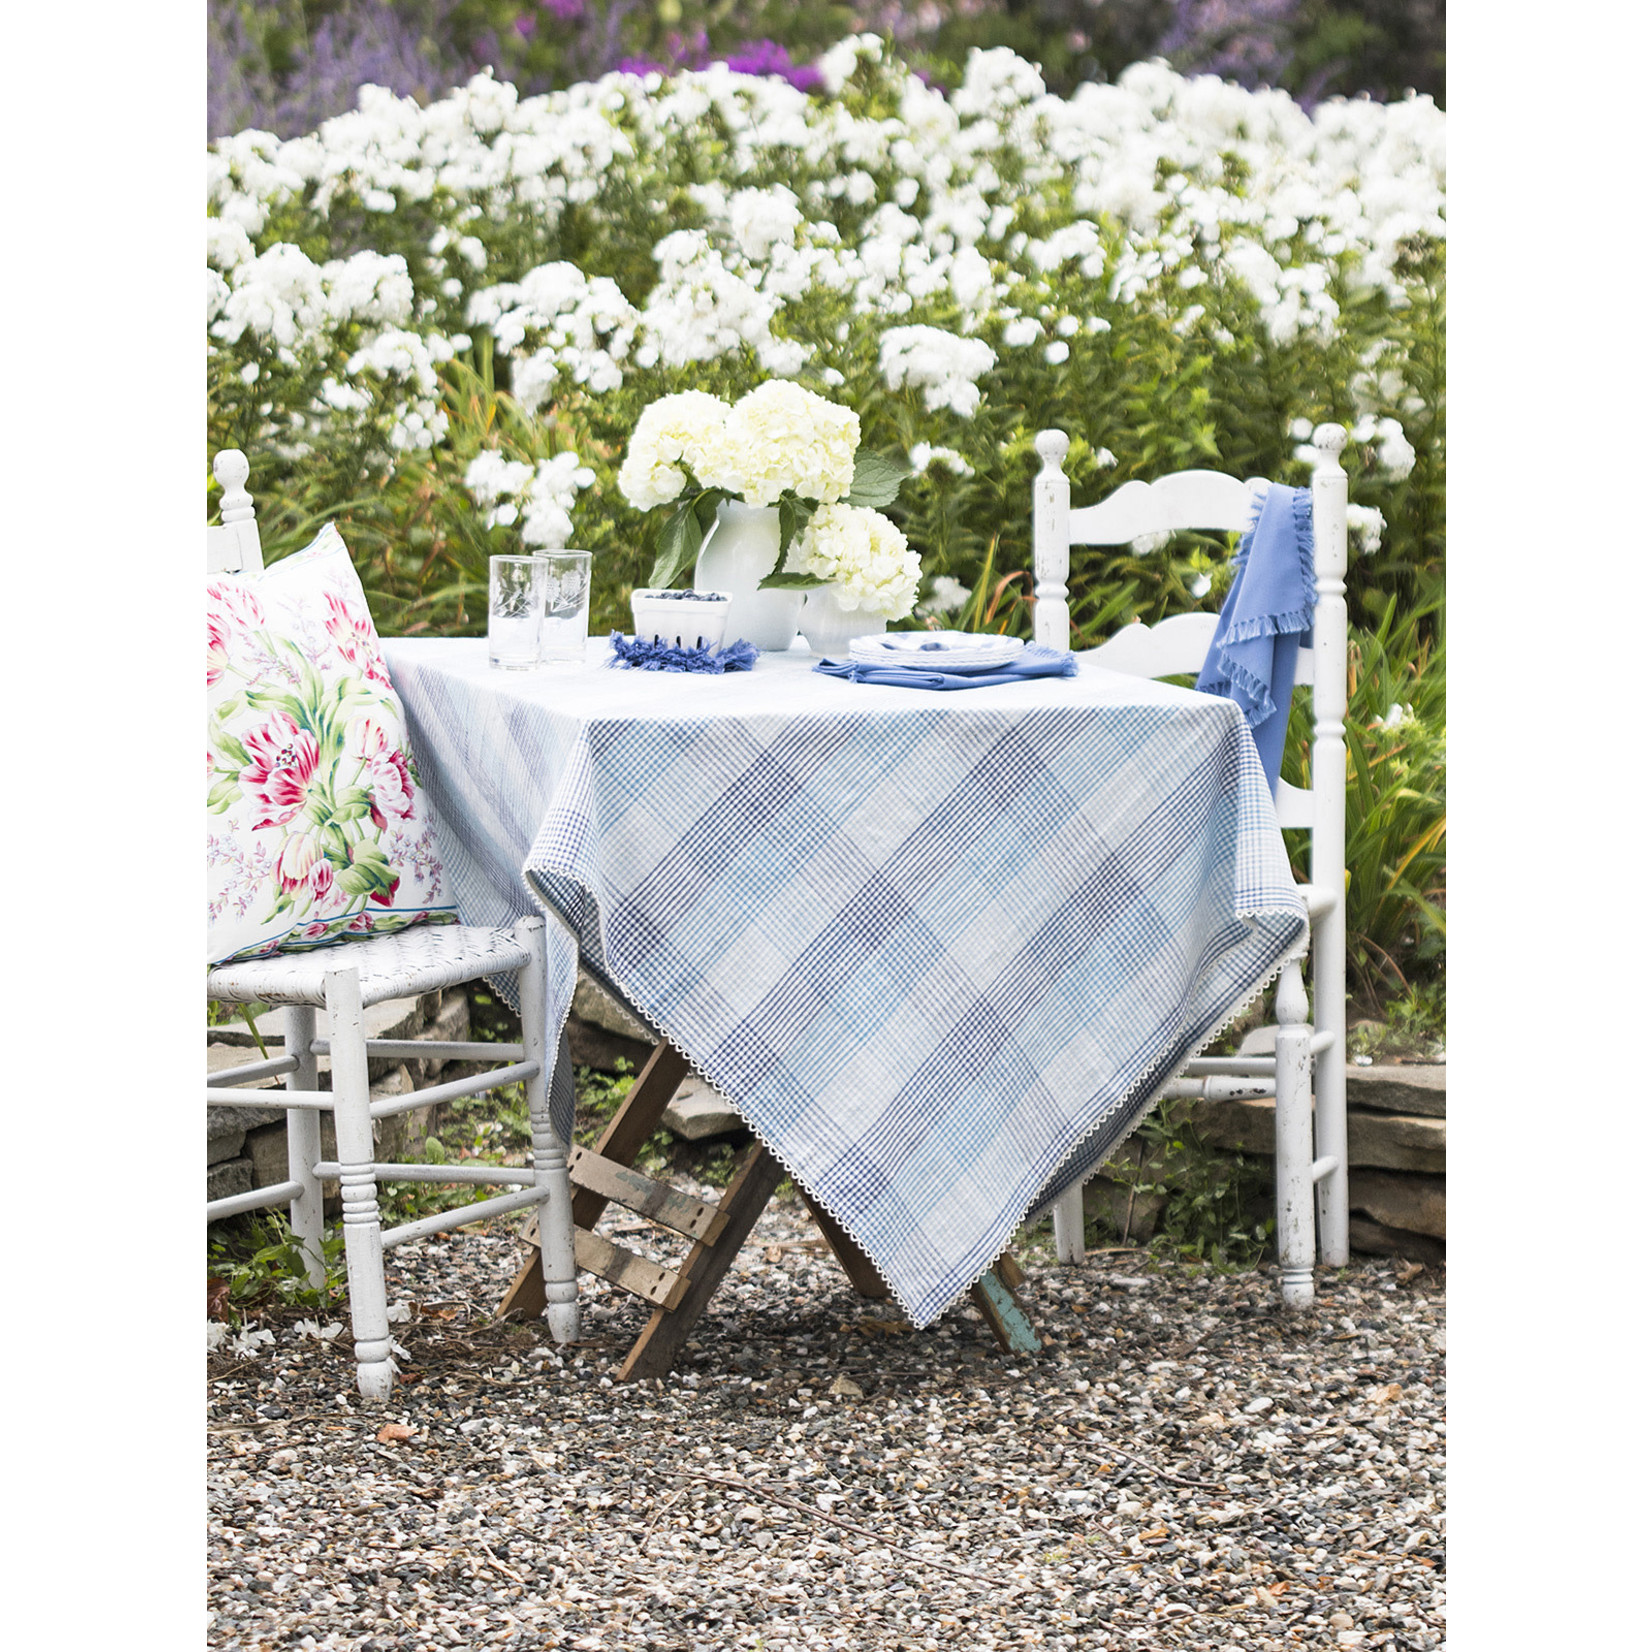 April Cornell Bluebell Tablecloth | April Cornell